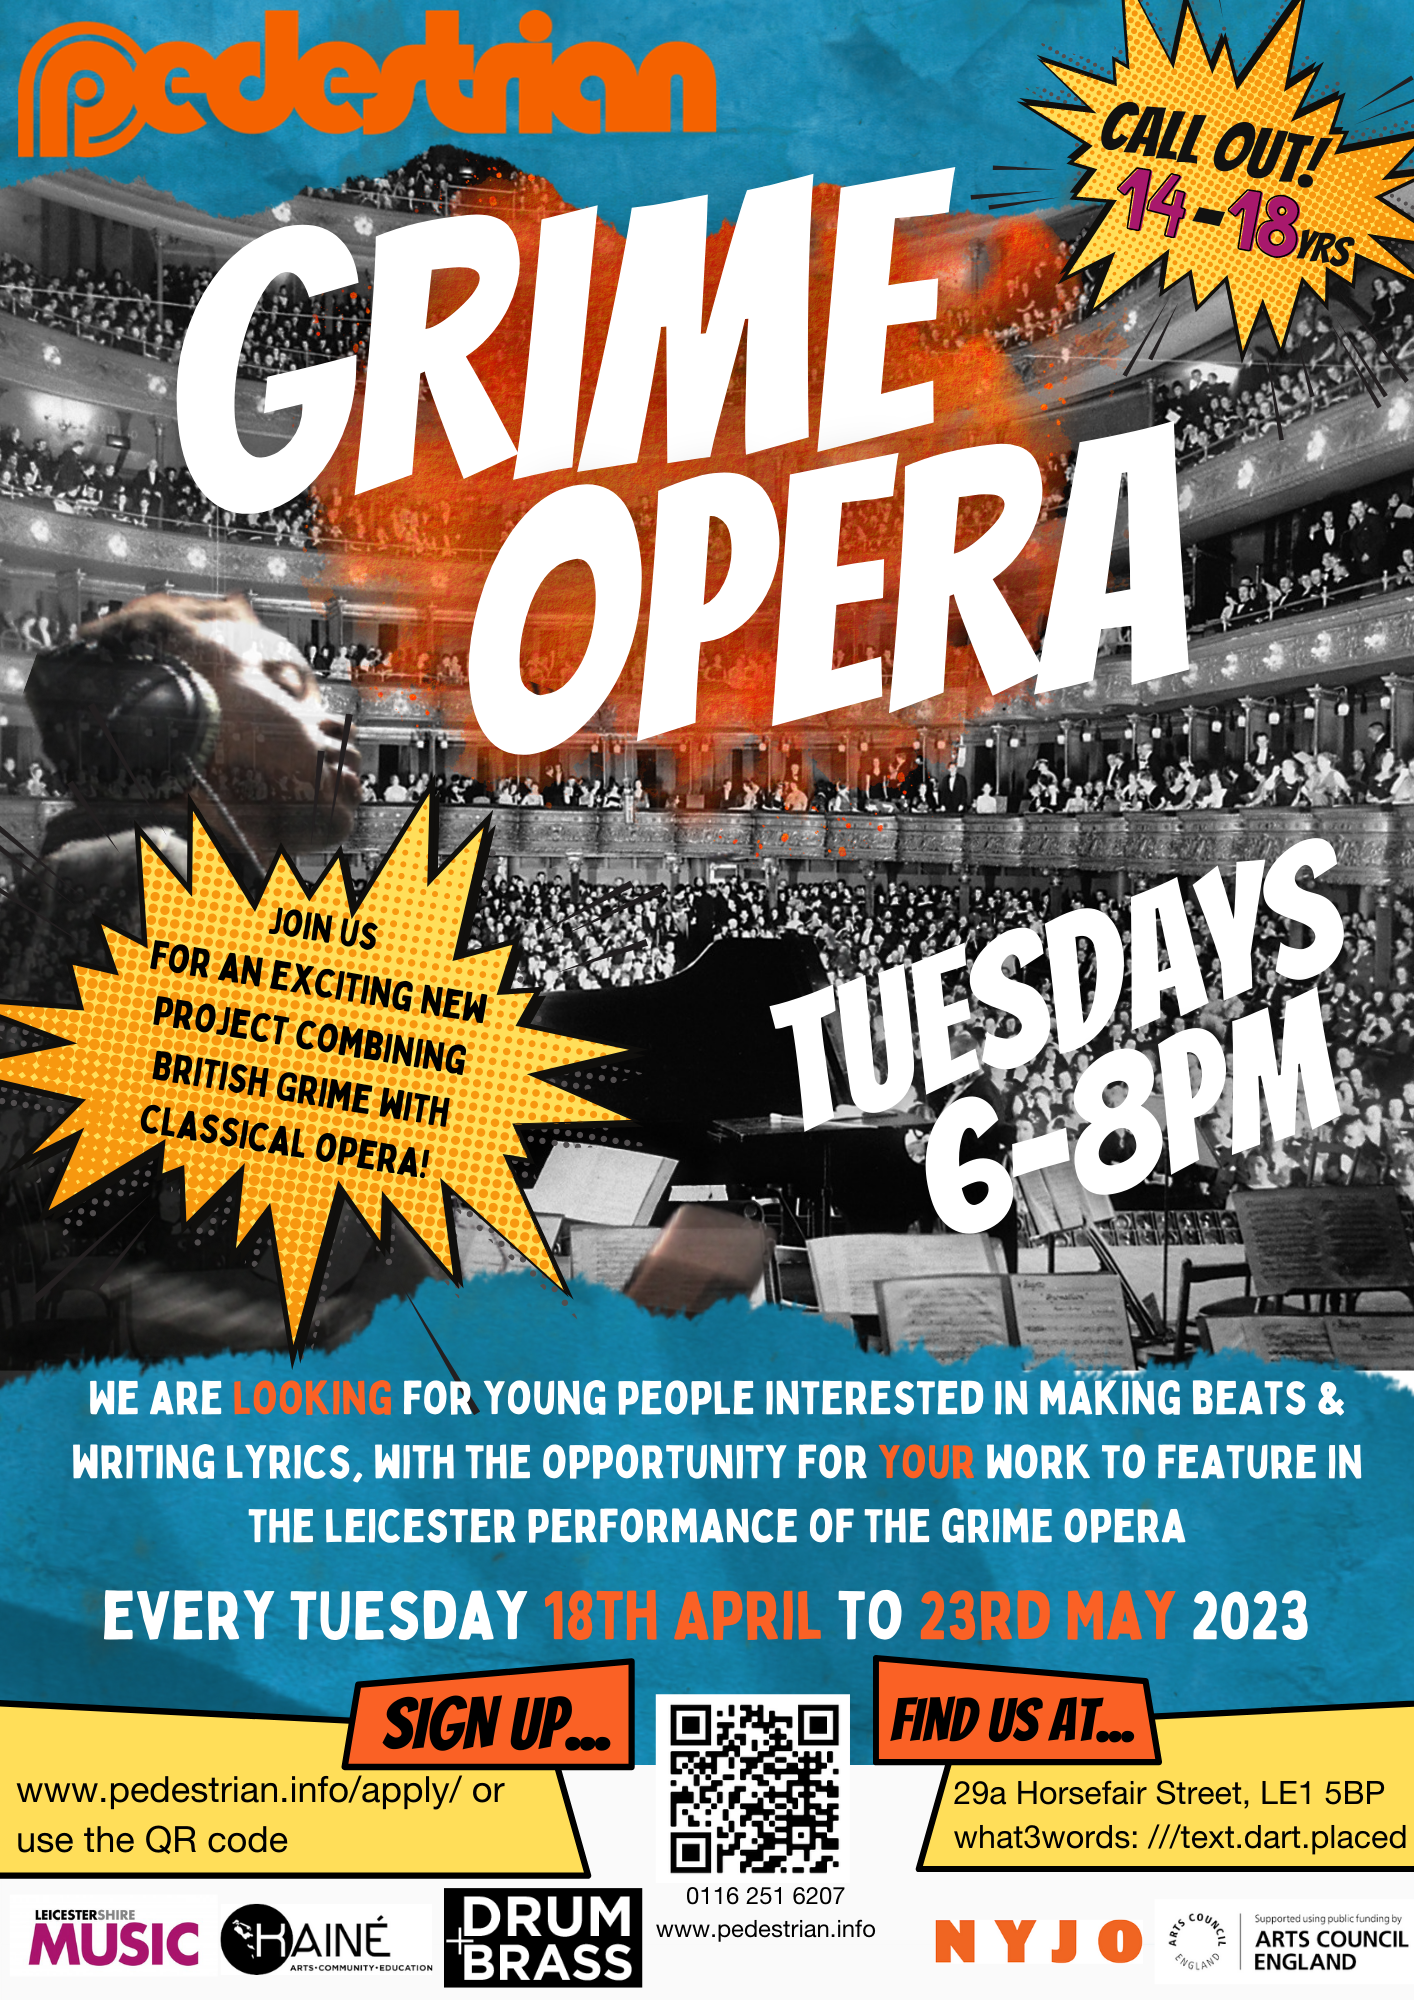 Grime Opera Community Sessions Tuesdays 6-8pm at pedestrian 29a Horsefair Street, LE1 5BP. Starting 18th April till 23rd May. Sign up www.pedestrian.info/apply/ if your interested in making beats or writing lyrics.